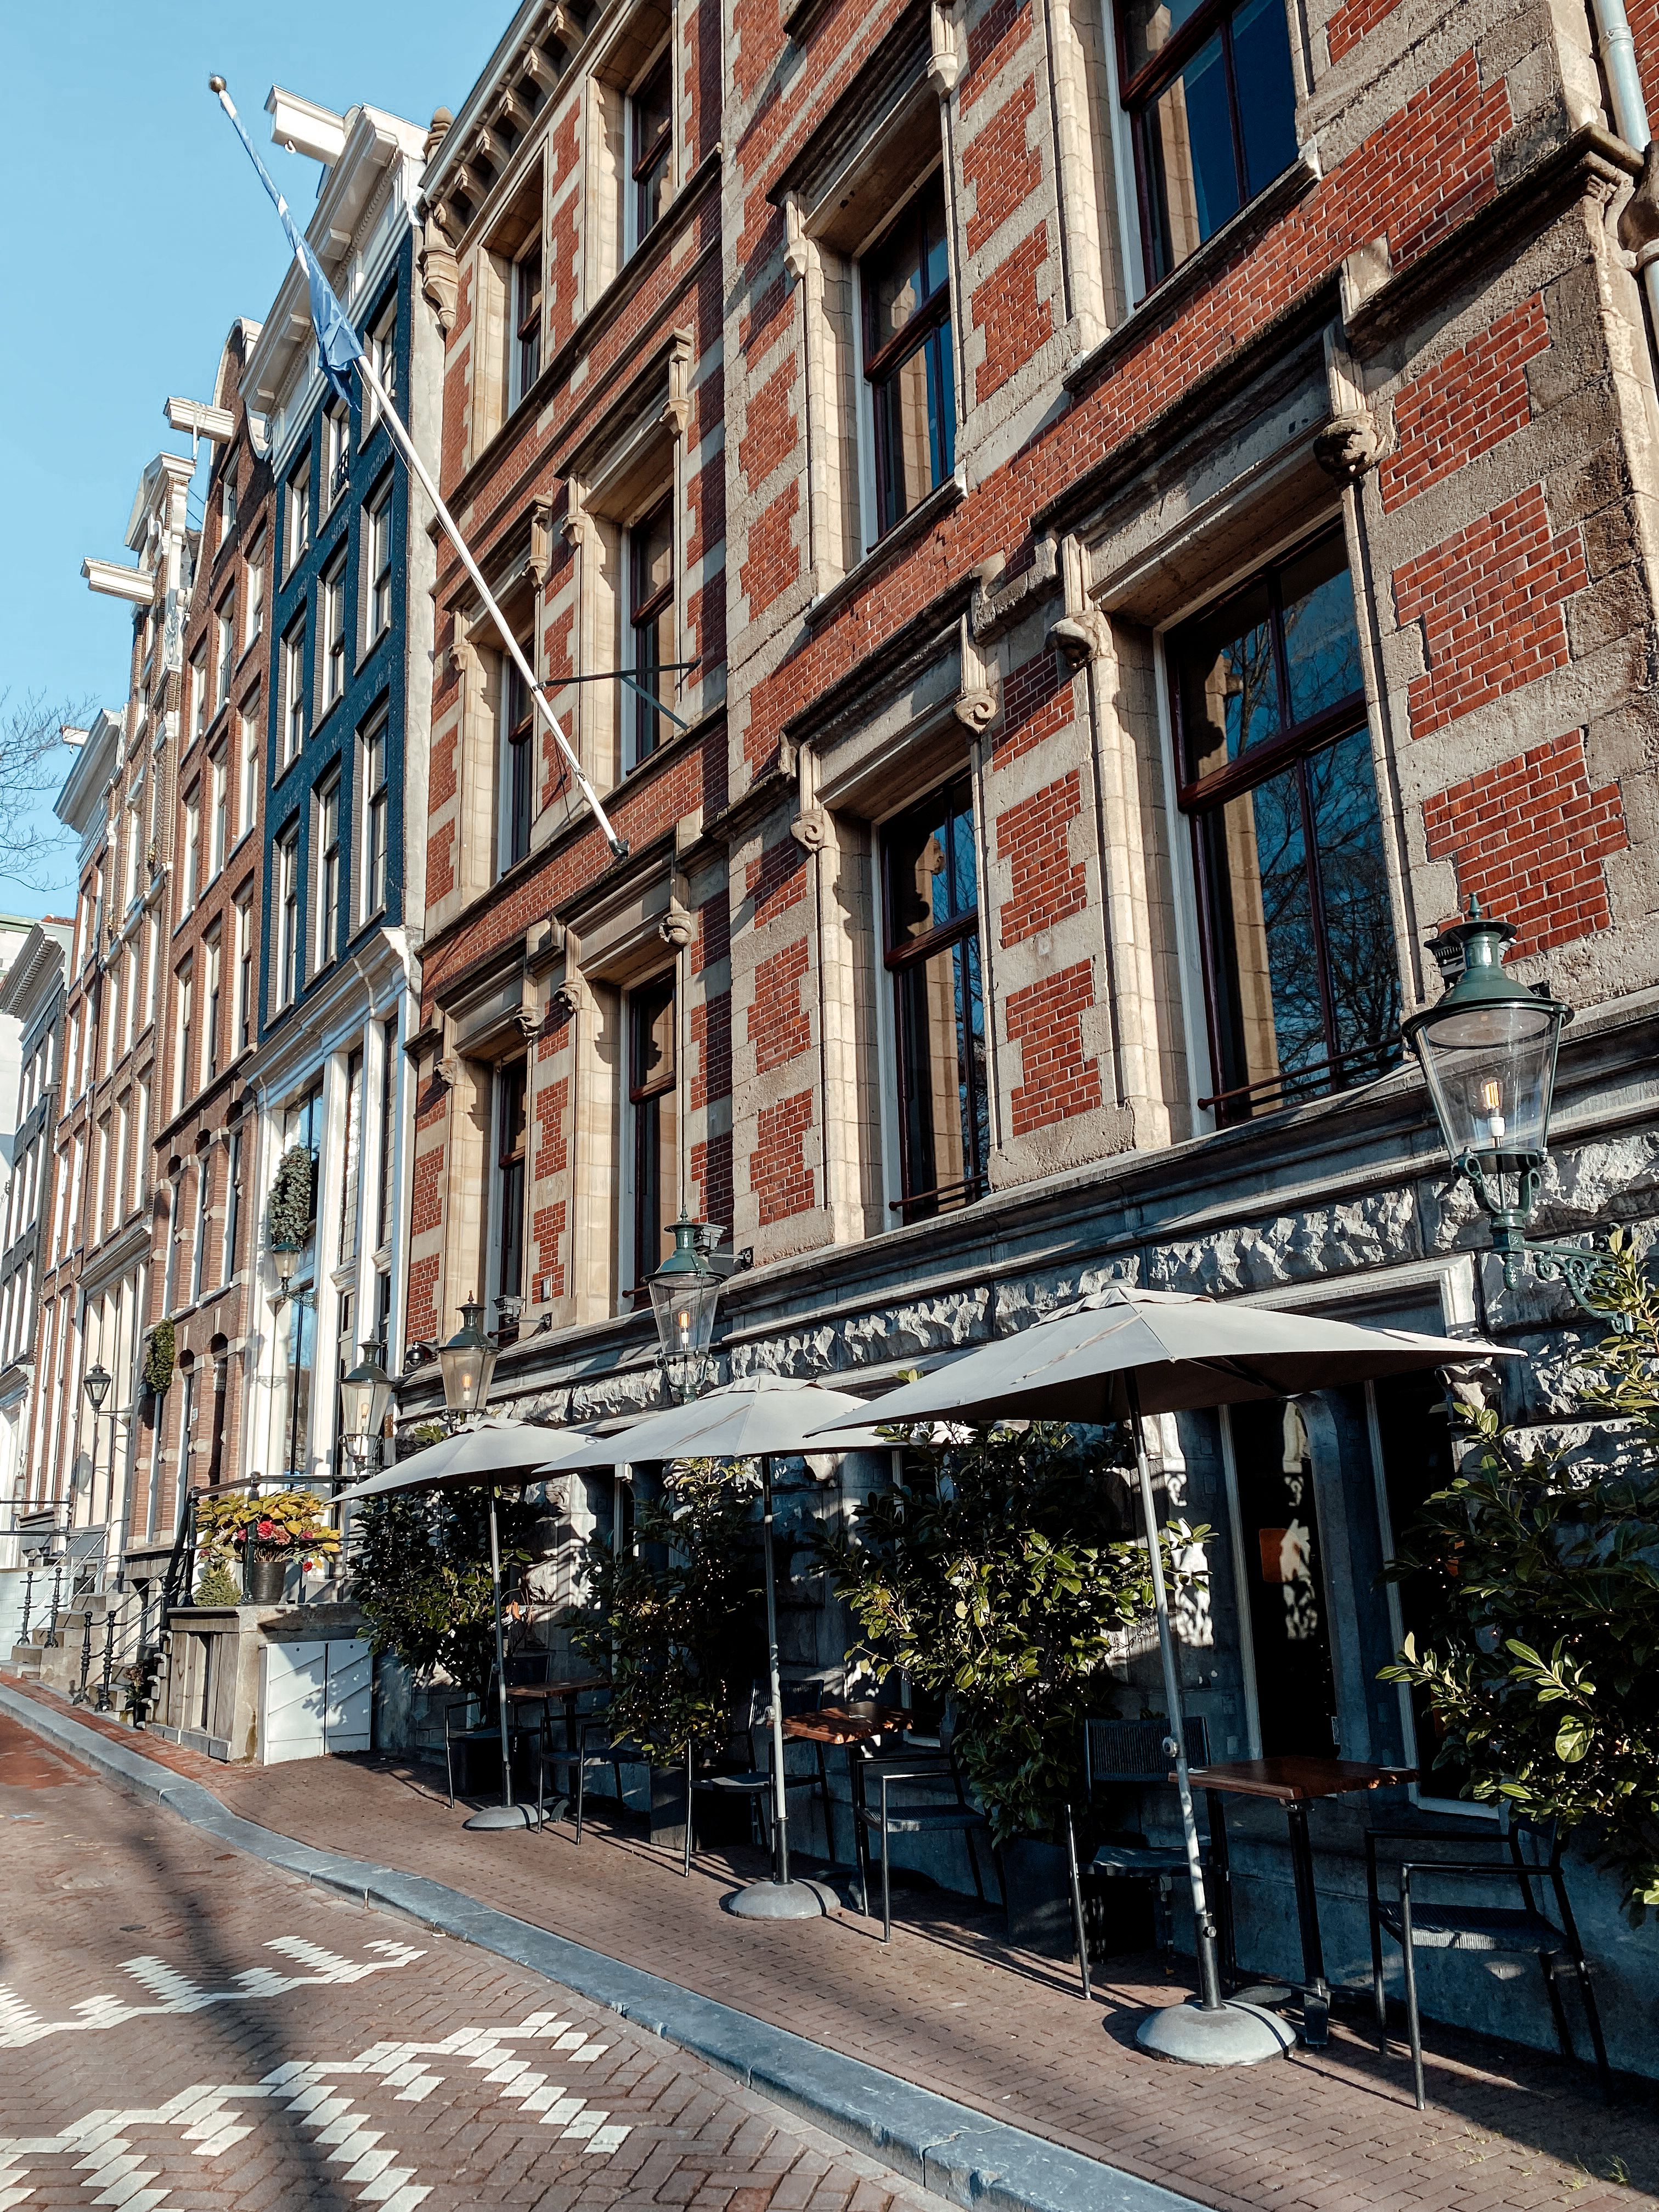 The Hoxton Hotel Amsterdam